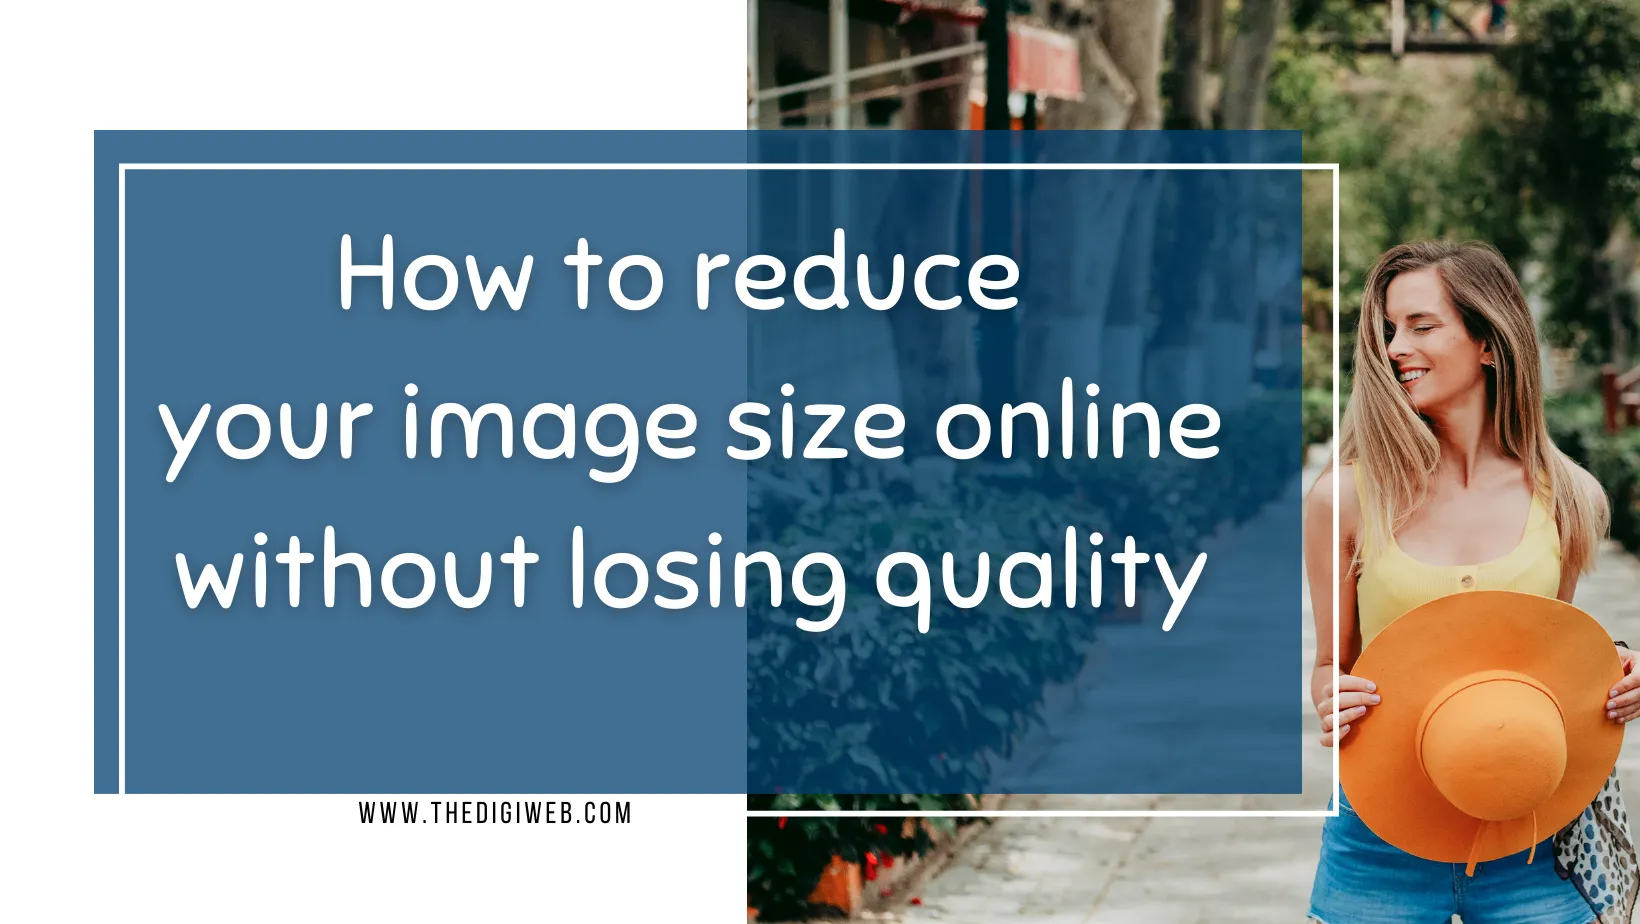 How to reduce image size online in 1 minute without losing the quality